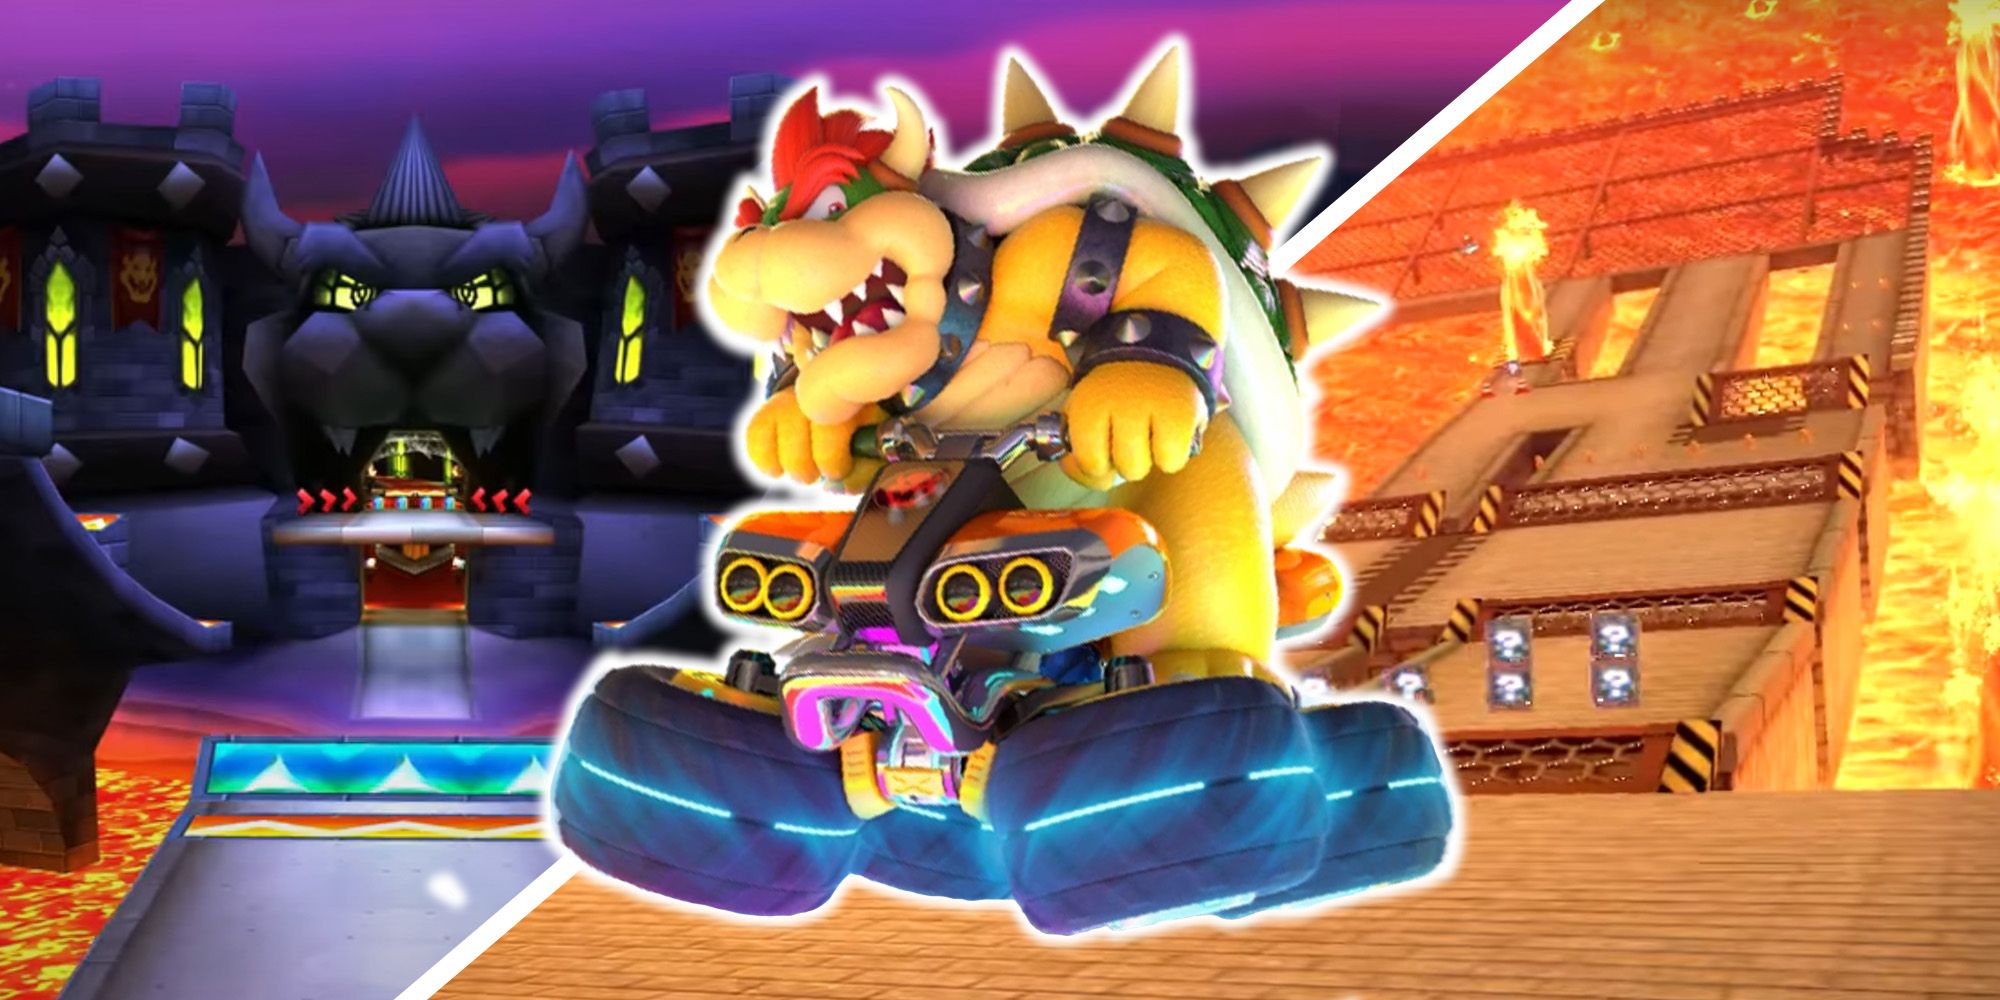 Mario Kart: Every Version Of Bowser's Castle Ranked - Split image of 3DS Bower's Castle and Bowser's Castle 3 from the Mario Kart 8 Deluxe Booster Course Pass